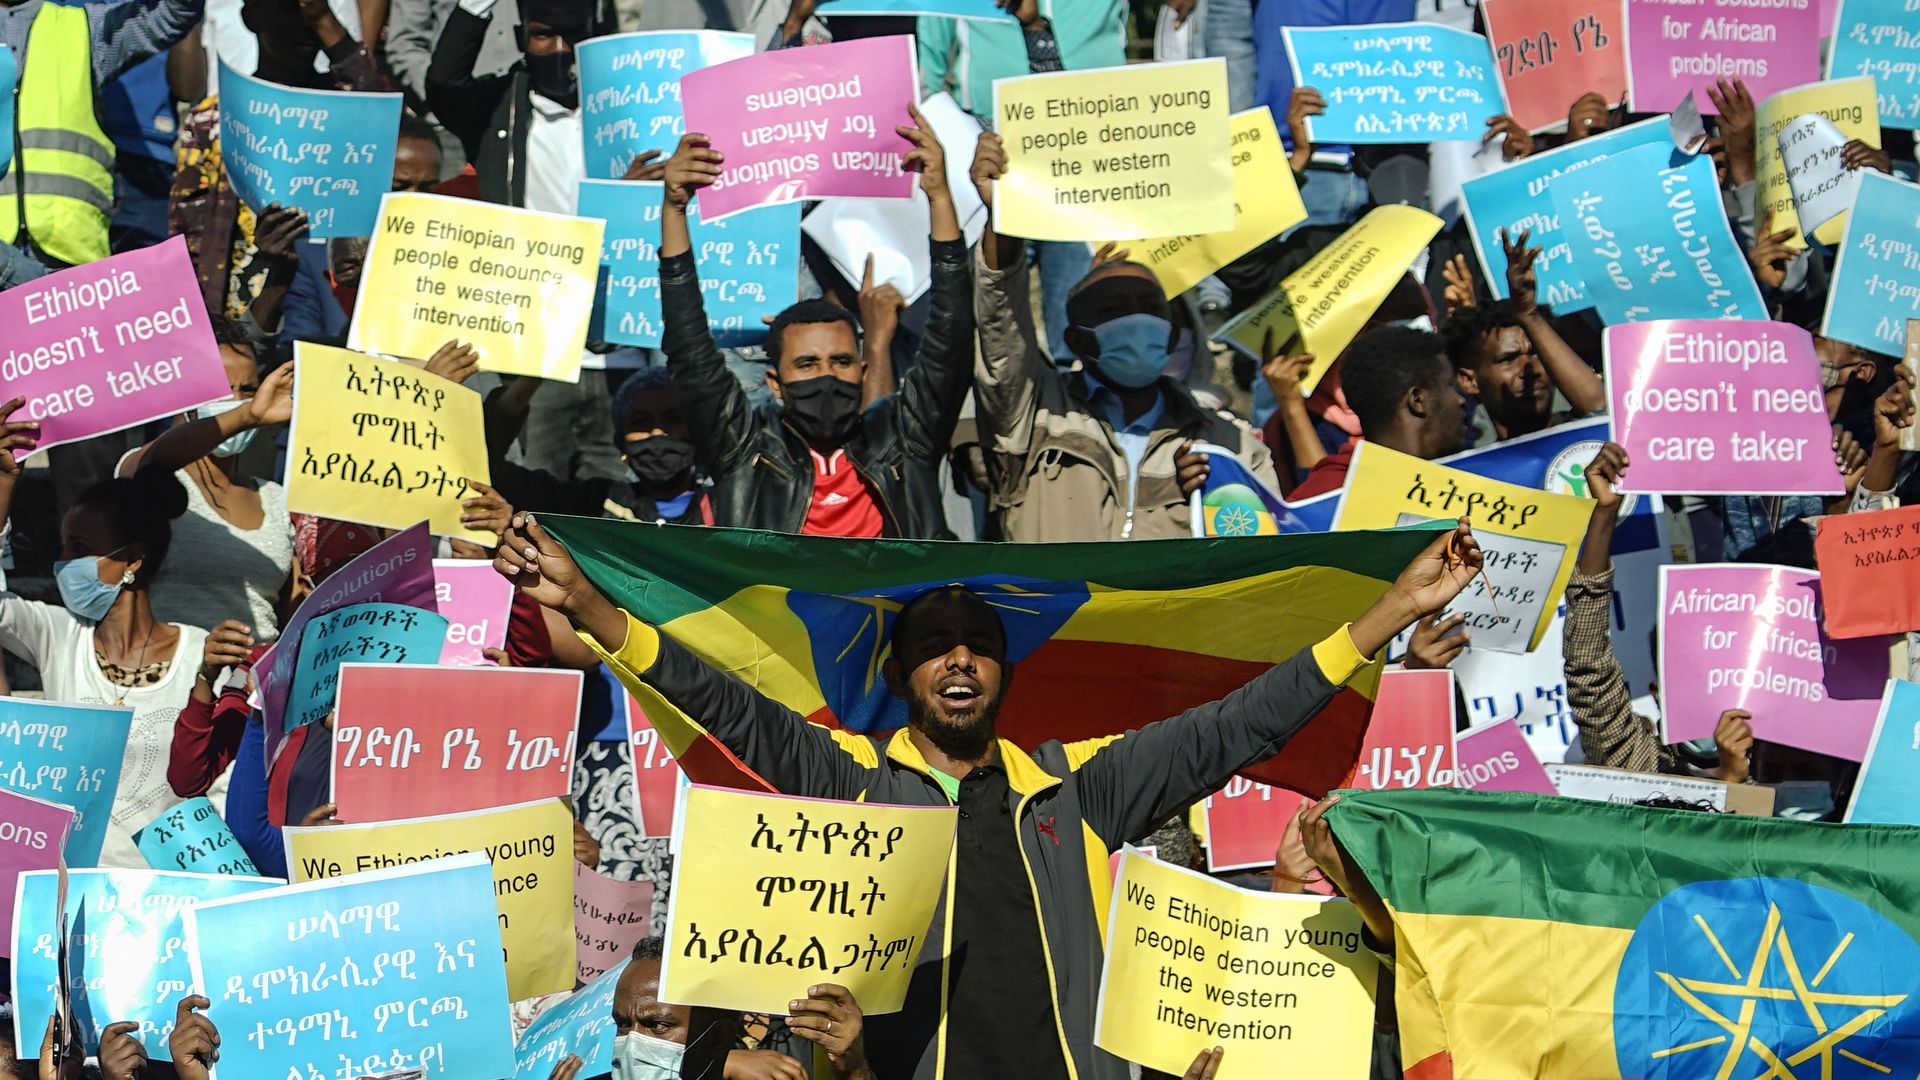 Protesters during a massive rally against the U.S. imposing restrictions over the conflict in the Tigray region in Addis Ababa, Ethiopia, on May 30, 2021